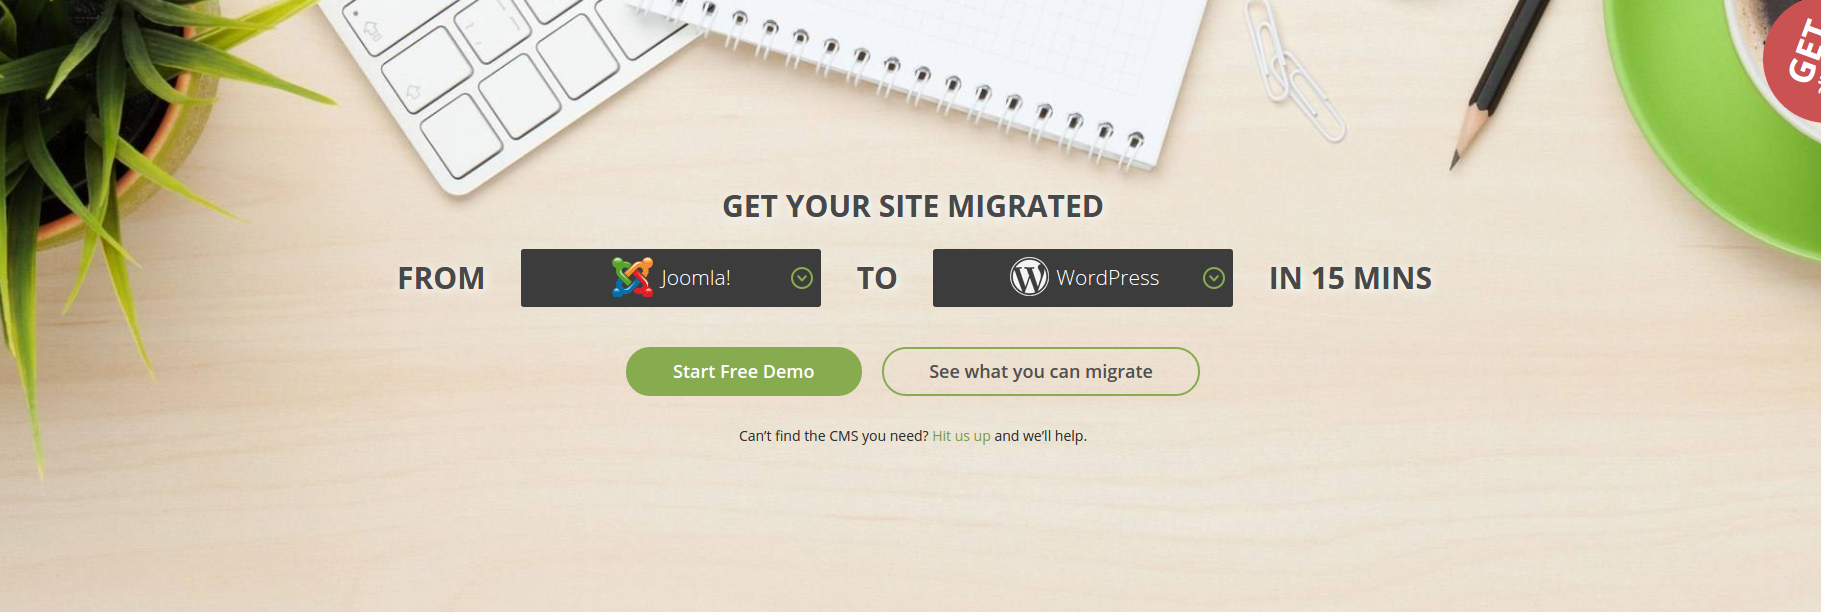 Start Free Demo Migration right away and check yourself how simple it is to move your site to WordPress with aisite.